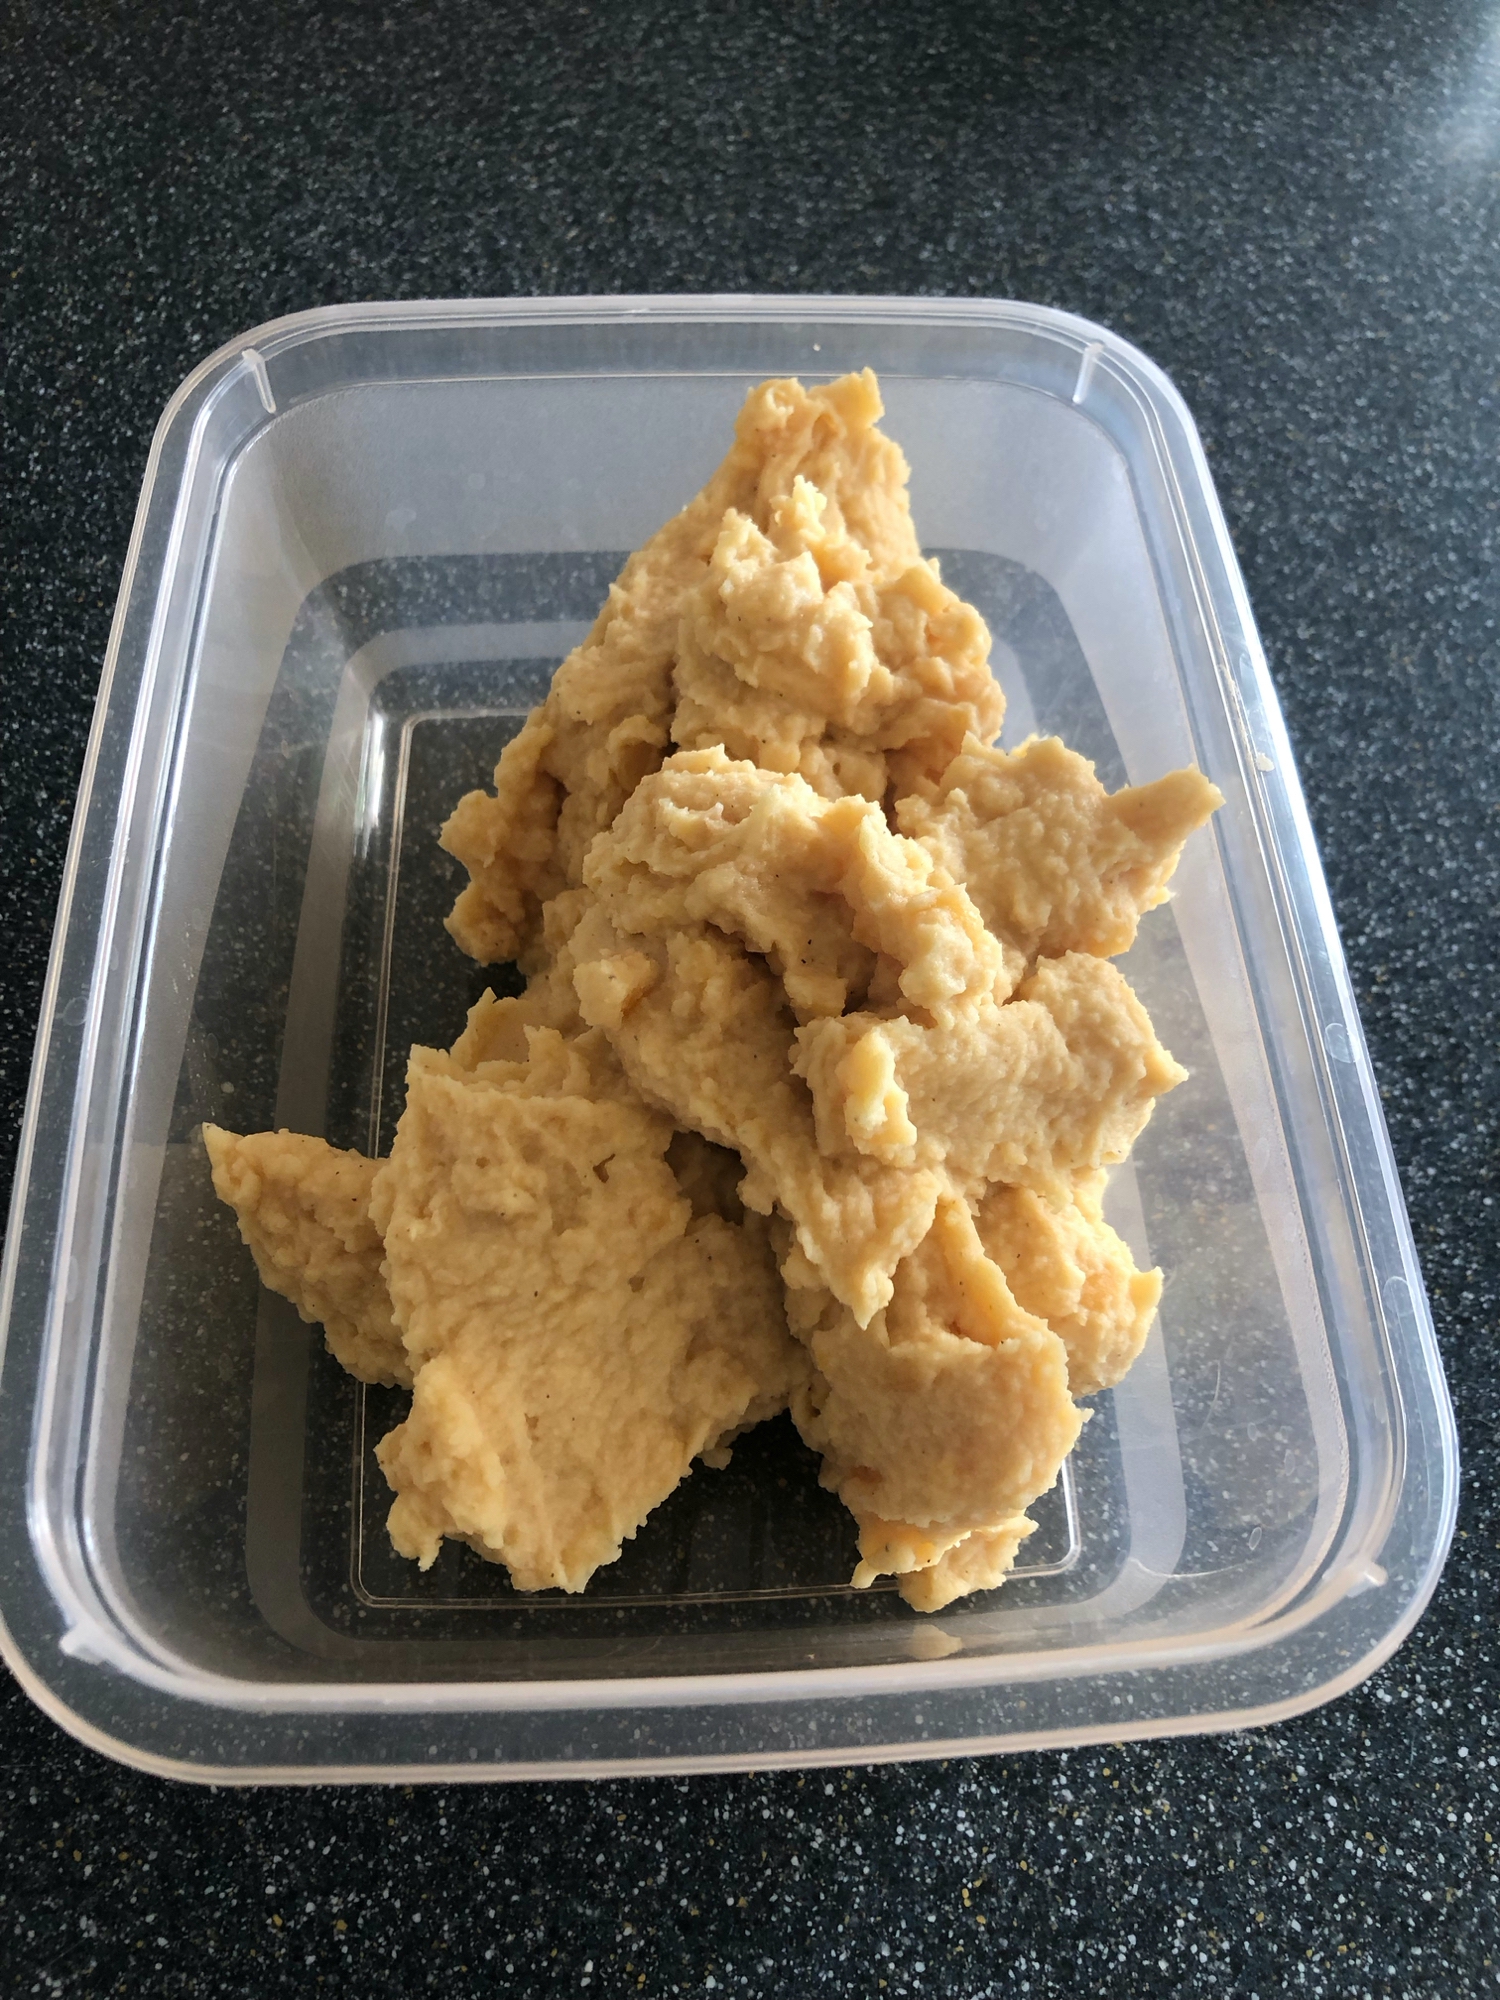 Plastic container filled with thick fluffy beige pease pudding.